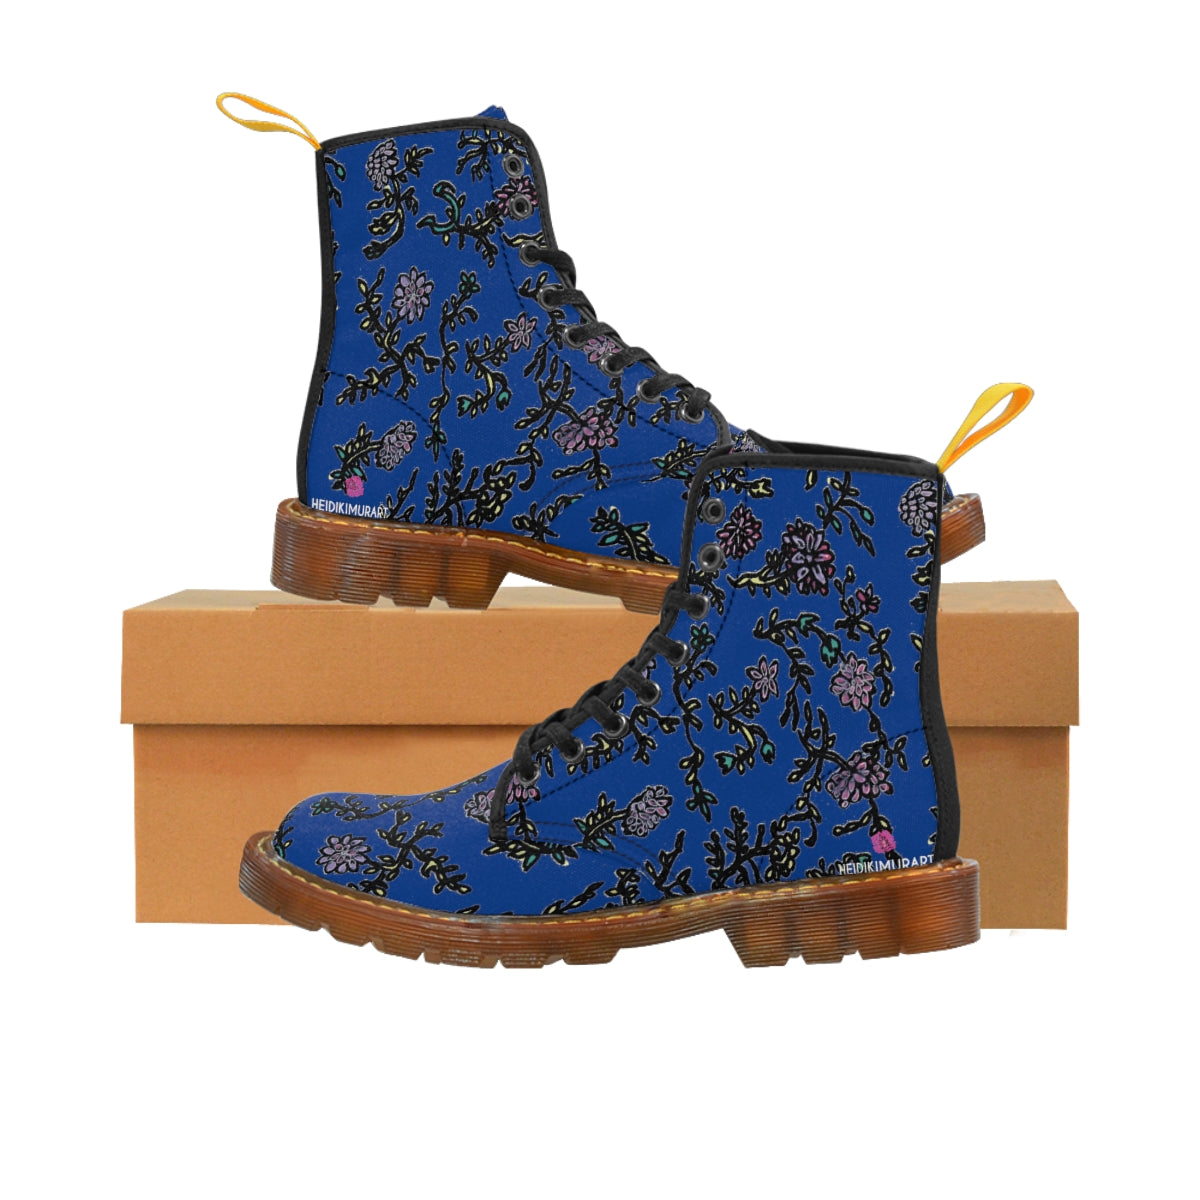 Blue Floral Print Women's Boots, Purple Floral Women's Boots, Flower Print Elegant Feminine Casual Fashion Gifts, Flower Rose Print Shoes For Flower Lovers, Combat Boots, Designer Women's Winter Lace-up Toe Cap Hiking Boots Shoes For Women (US Size 6.5-11) Best Floral Boots, Floral Boots Womens, Vintage Style Floral Boots 